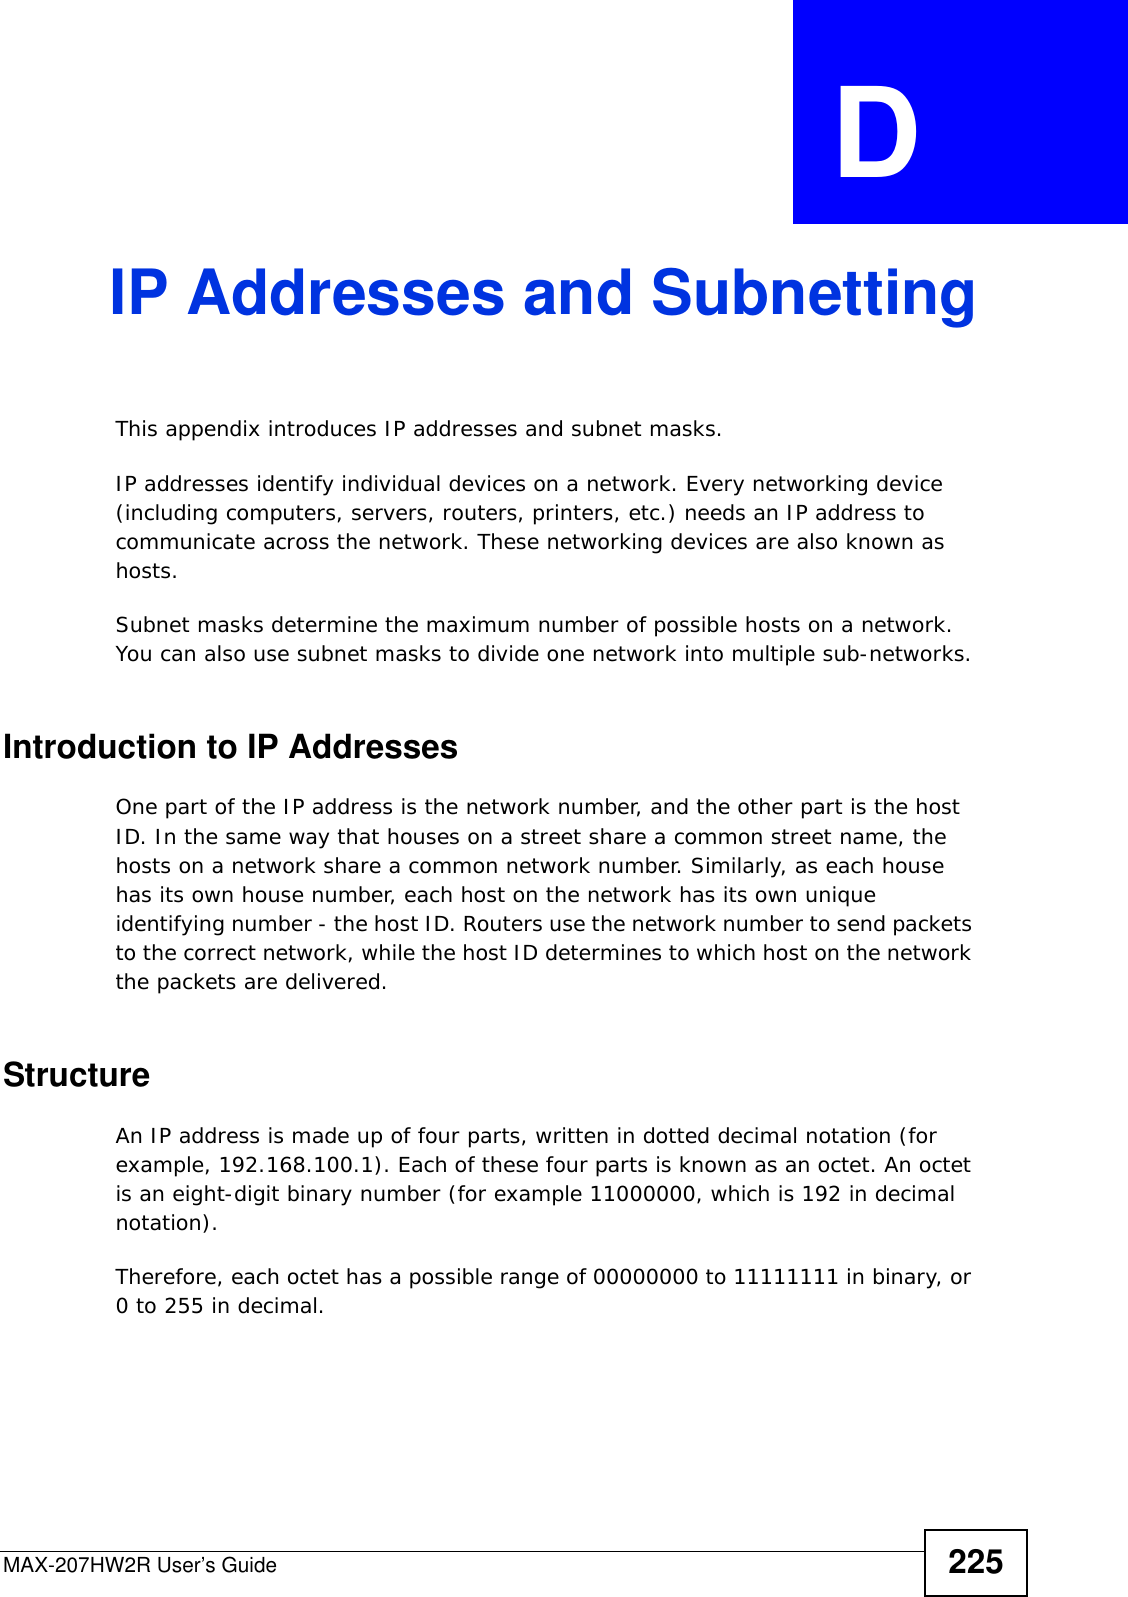 MAX-207HW2R User’s Guide 225APPENDIX  D IP Addresses and SubnettingThis appendix introduces IP addresses and subnet masks. IP addresses identify individual devices on a network. Every networking device (including computers, servers, routers, printers, etc.) needs an IP address to communicate across the network. These networking devices are also known as hosts.Subnet masks determine the maximum number of possible hosts on a network. You can also use subnet masks to divide one network into multiple sub-networks.Introduction to IP AddressesOne part of the IP address is the network number, and the other part is the host ID. In the same way that houses on a street share a common street name, the hosts on a network share a common network number. Similarly, as each house has its own house number, each host on the network has its own unique identifying number - the host ID. Routers use the network number to send packets to the correct network, while the host ID determines to which host on the network the packets are delivered.StructureAn IP address is made up of four parts, written in dotted decimal notation (for example, 192.168.100.1). Each of these four parts is known as an octet. An octet is an eight-digit binary number (for example 11000000, which is 192 in decimal notation). Therefore, each octet has a possible range of 00000000 to 11111111 in binary, or 0 to 255 in decimal.